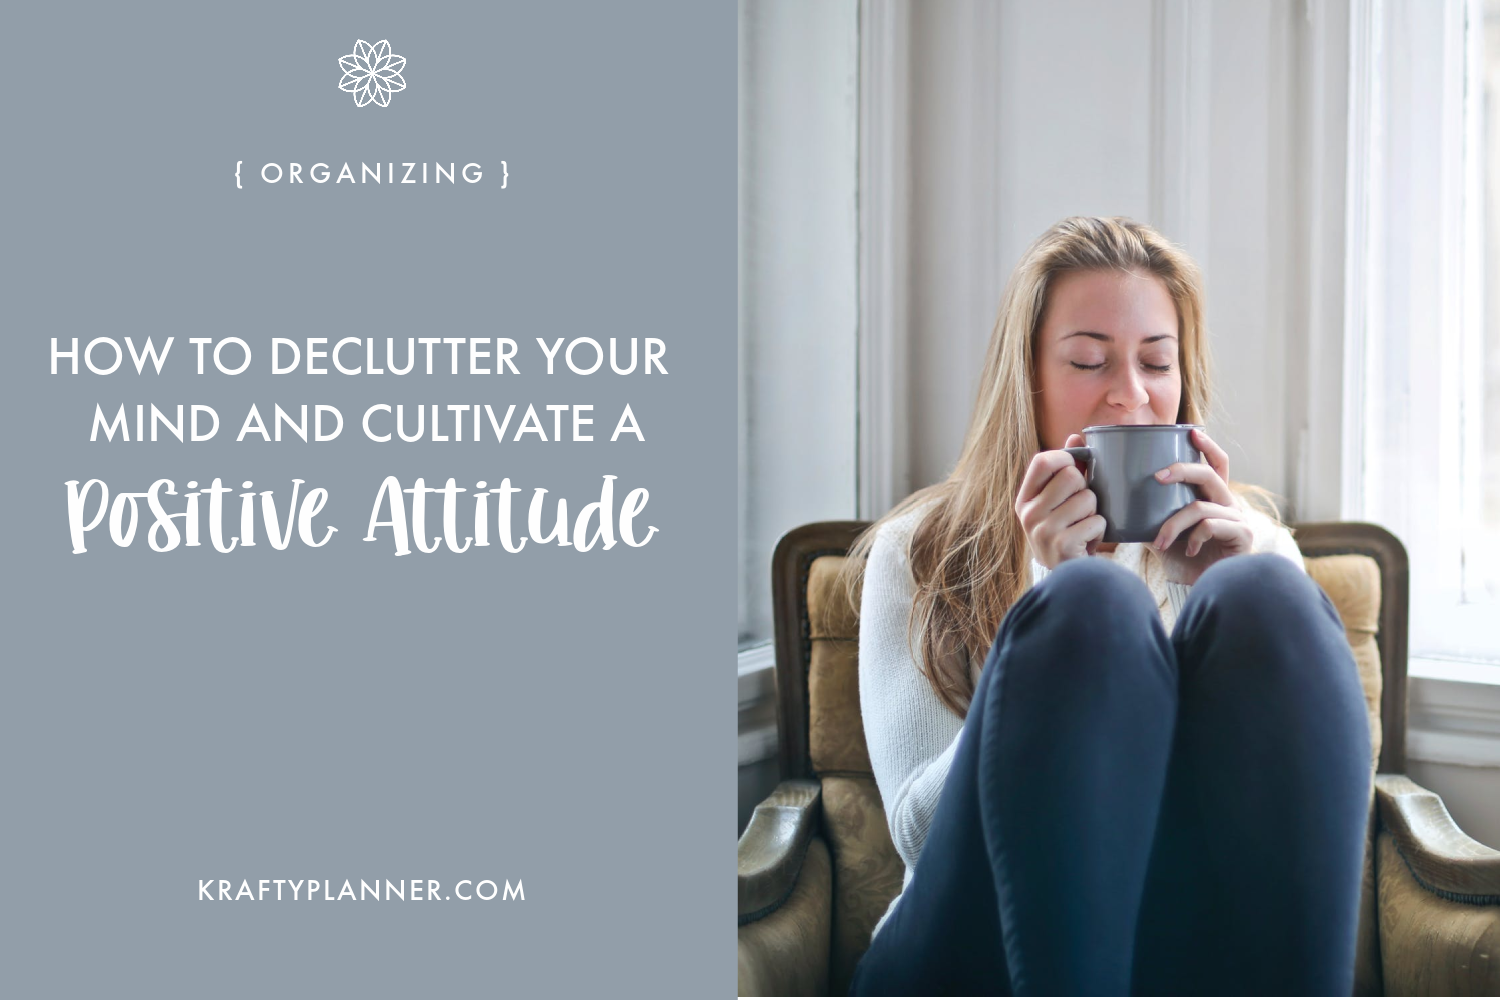 How To Declutter Your Mind and Cultivate a Positive Attitude